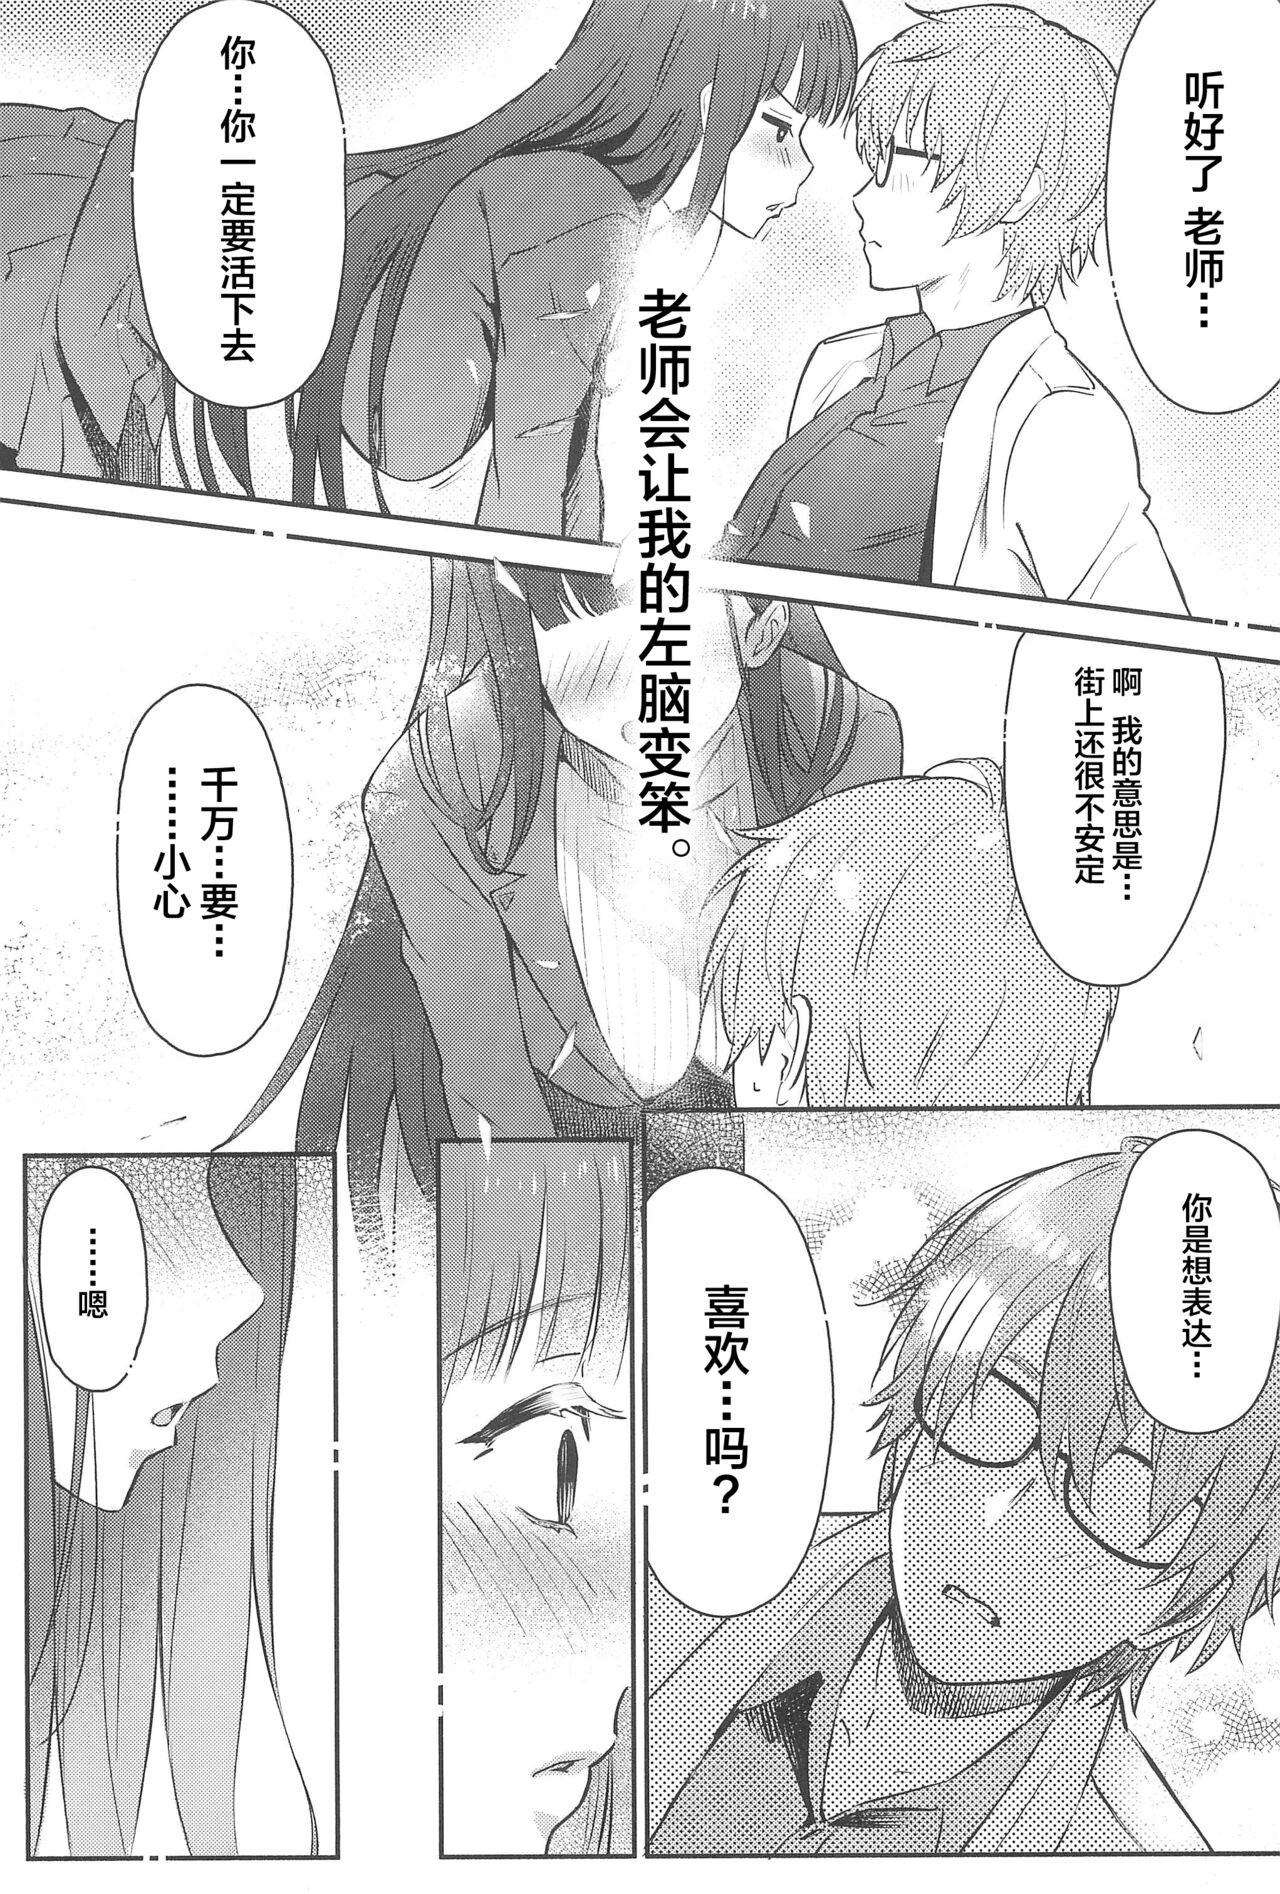 Tiny Girl (C102) [Shiro no Ie (Yochiki)] Rio-chan wa Otosaretai. - Rio Want To Be Fall in Love (Blue Archive) - Blue archive Gay Trimmed - Page 7